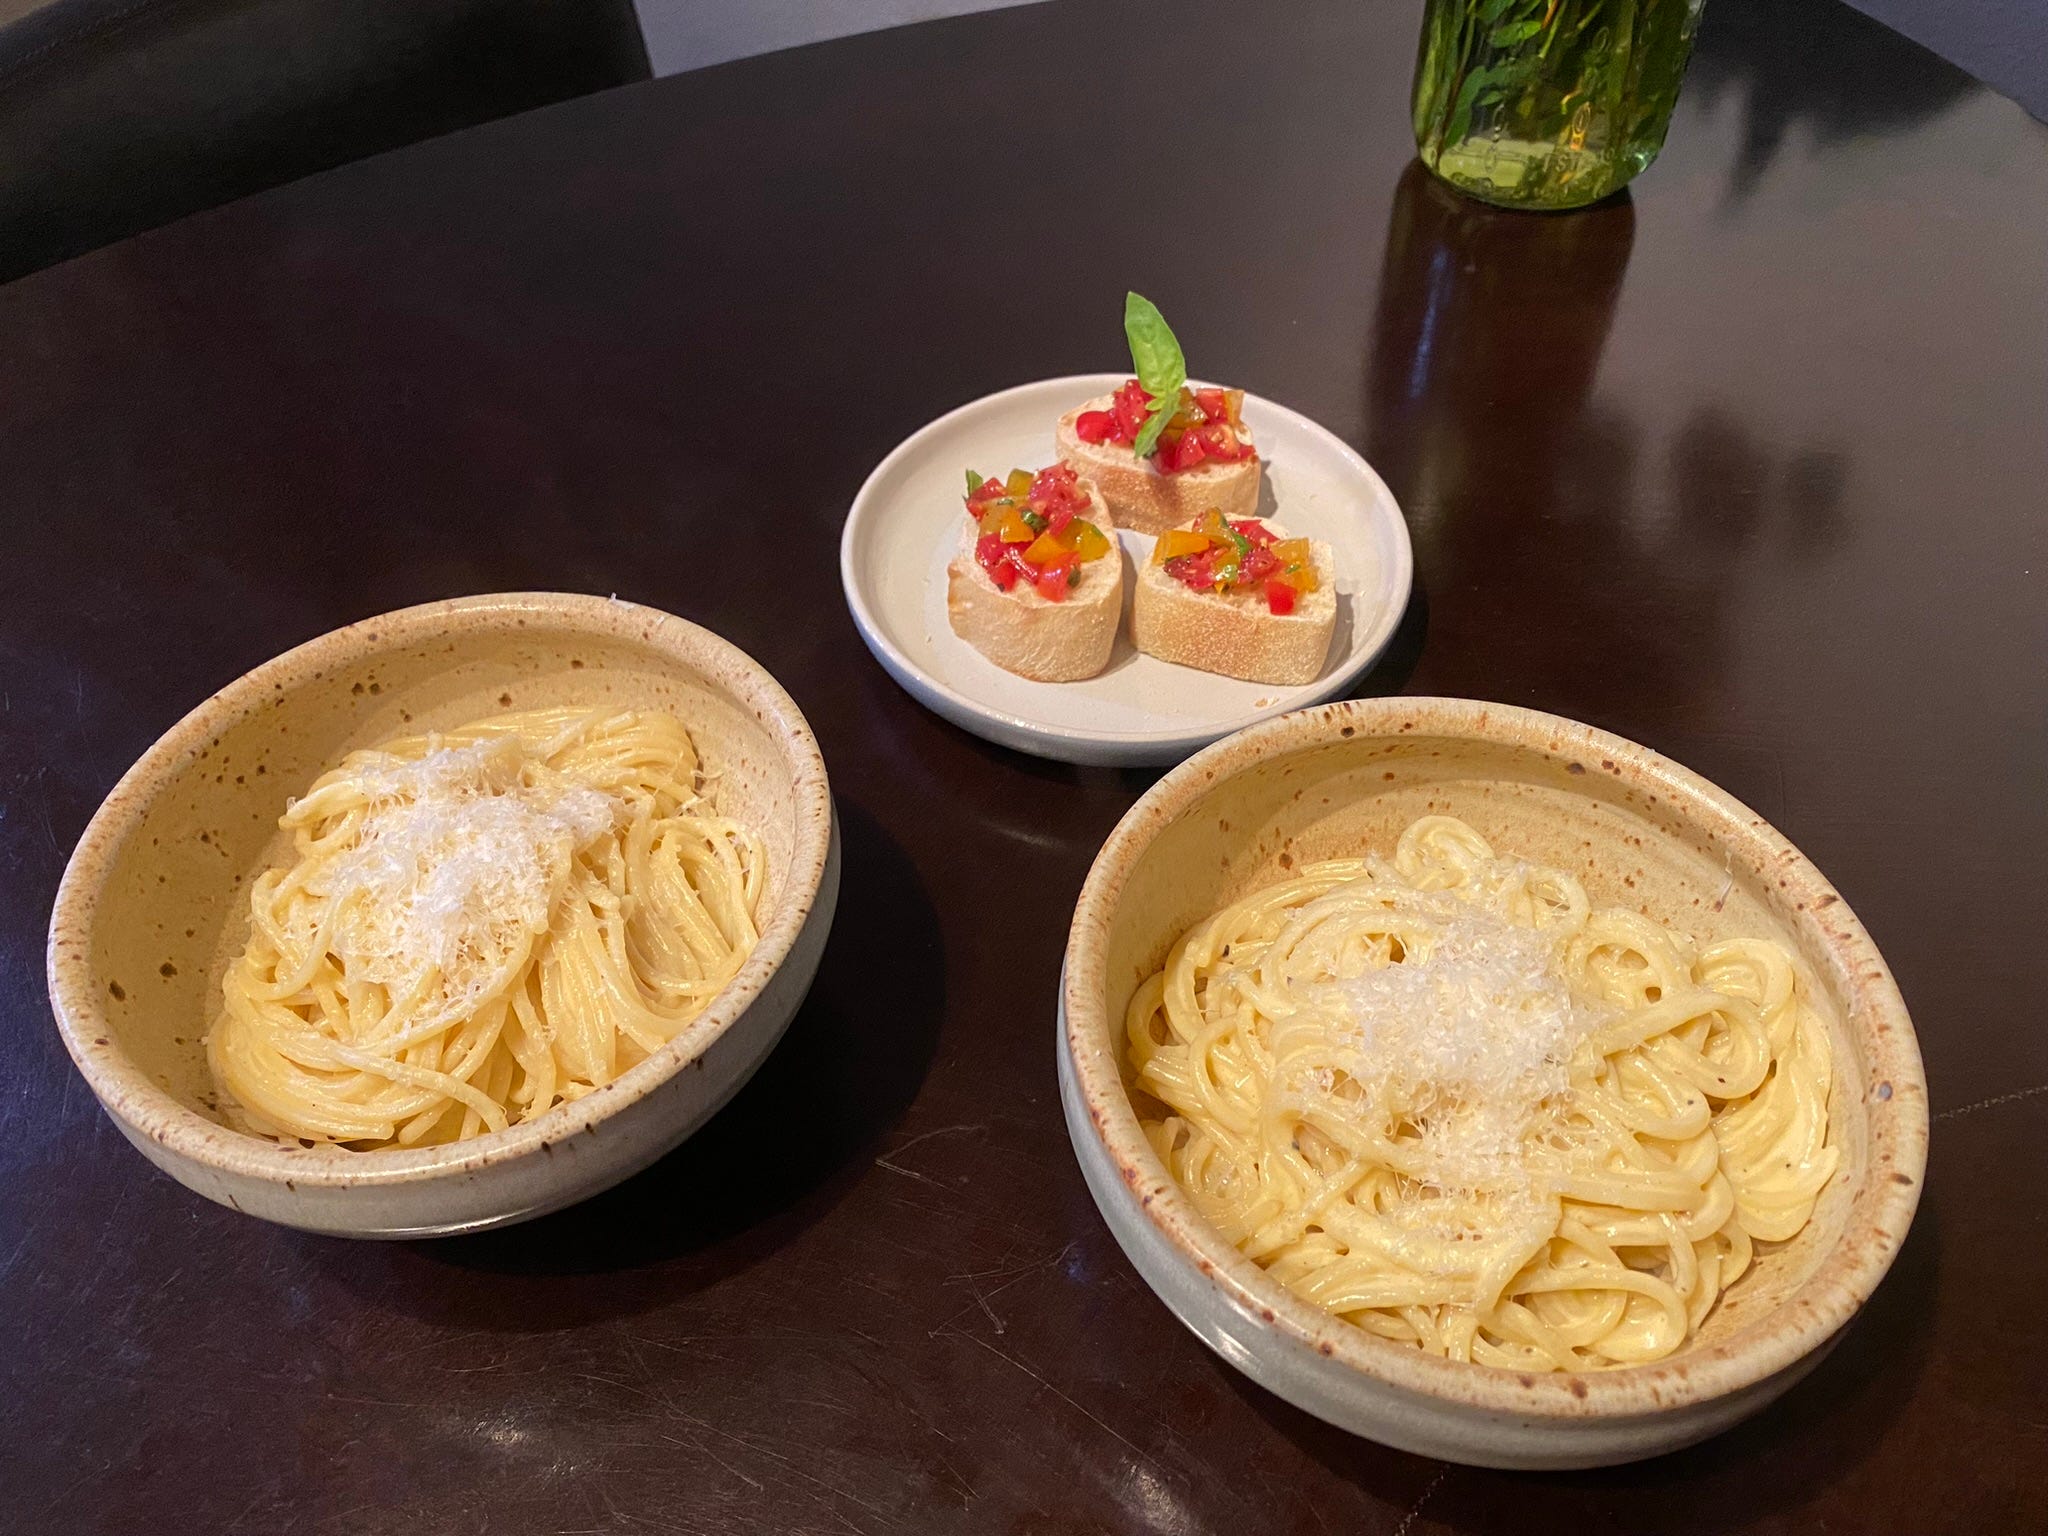 <p>I was so excited for Friday's dinner, which consisted of bruschetta, a meatless carbonara, and a fancy, more challenging <a href="https://cooking.nytimes.com/recipes/9039-vanilla-creme-brulee">crème brûlée</a>.</p><p>Despite wanting a bit of a challenge, I was surprised by how easy the crème brûlée was. It only took about 15 minutes to prep, then the rest of the time was spent baking, chilling, or broiling.</p><p>The crème brûlée turned out nearly perfect, with a slightly overdone top. I knew instantly this would become a <a href="https://www.insider.com/how-to-make-best-chocolate-chip-cookies-tips-from-chef">staple dessert recipe</a> for our household, and I was happy I decided to try something that seemed daunting to me.</p><p>My success with the crème brûlée restored my excitement heading into the last day.</p>